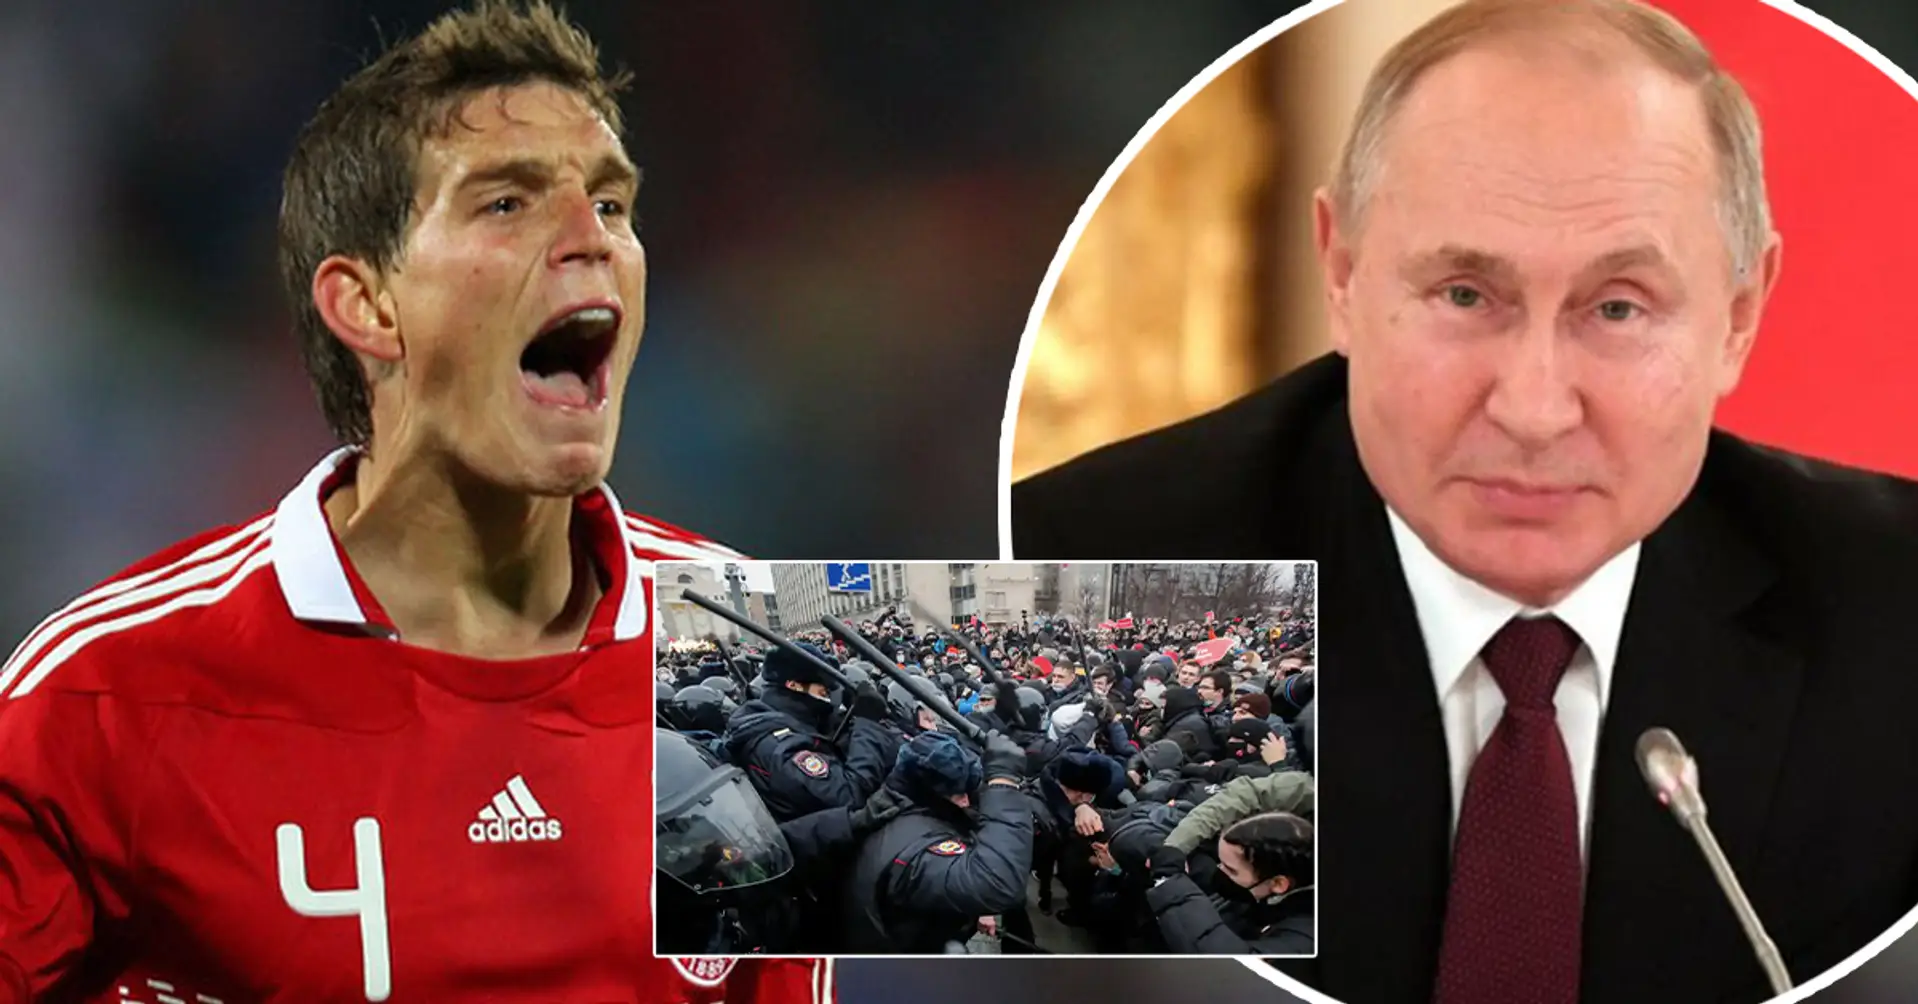 Homeless man pretends to be ex-Liverpool star Agger, goes to jail in Russia for protesting against Vladimir Putin